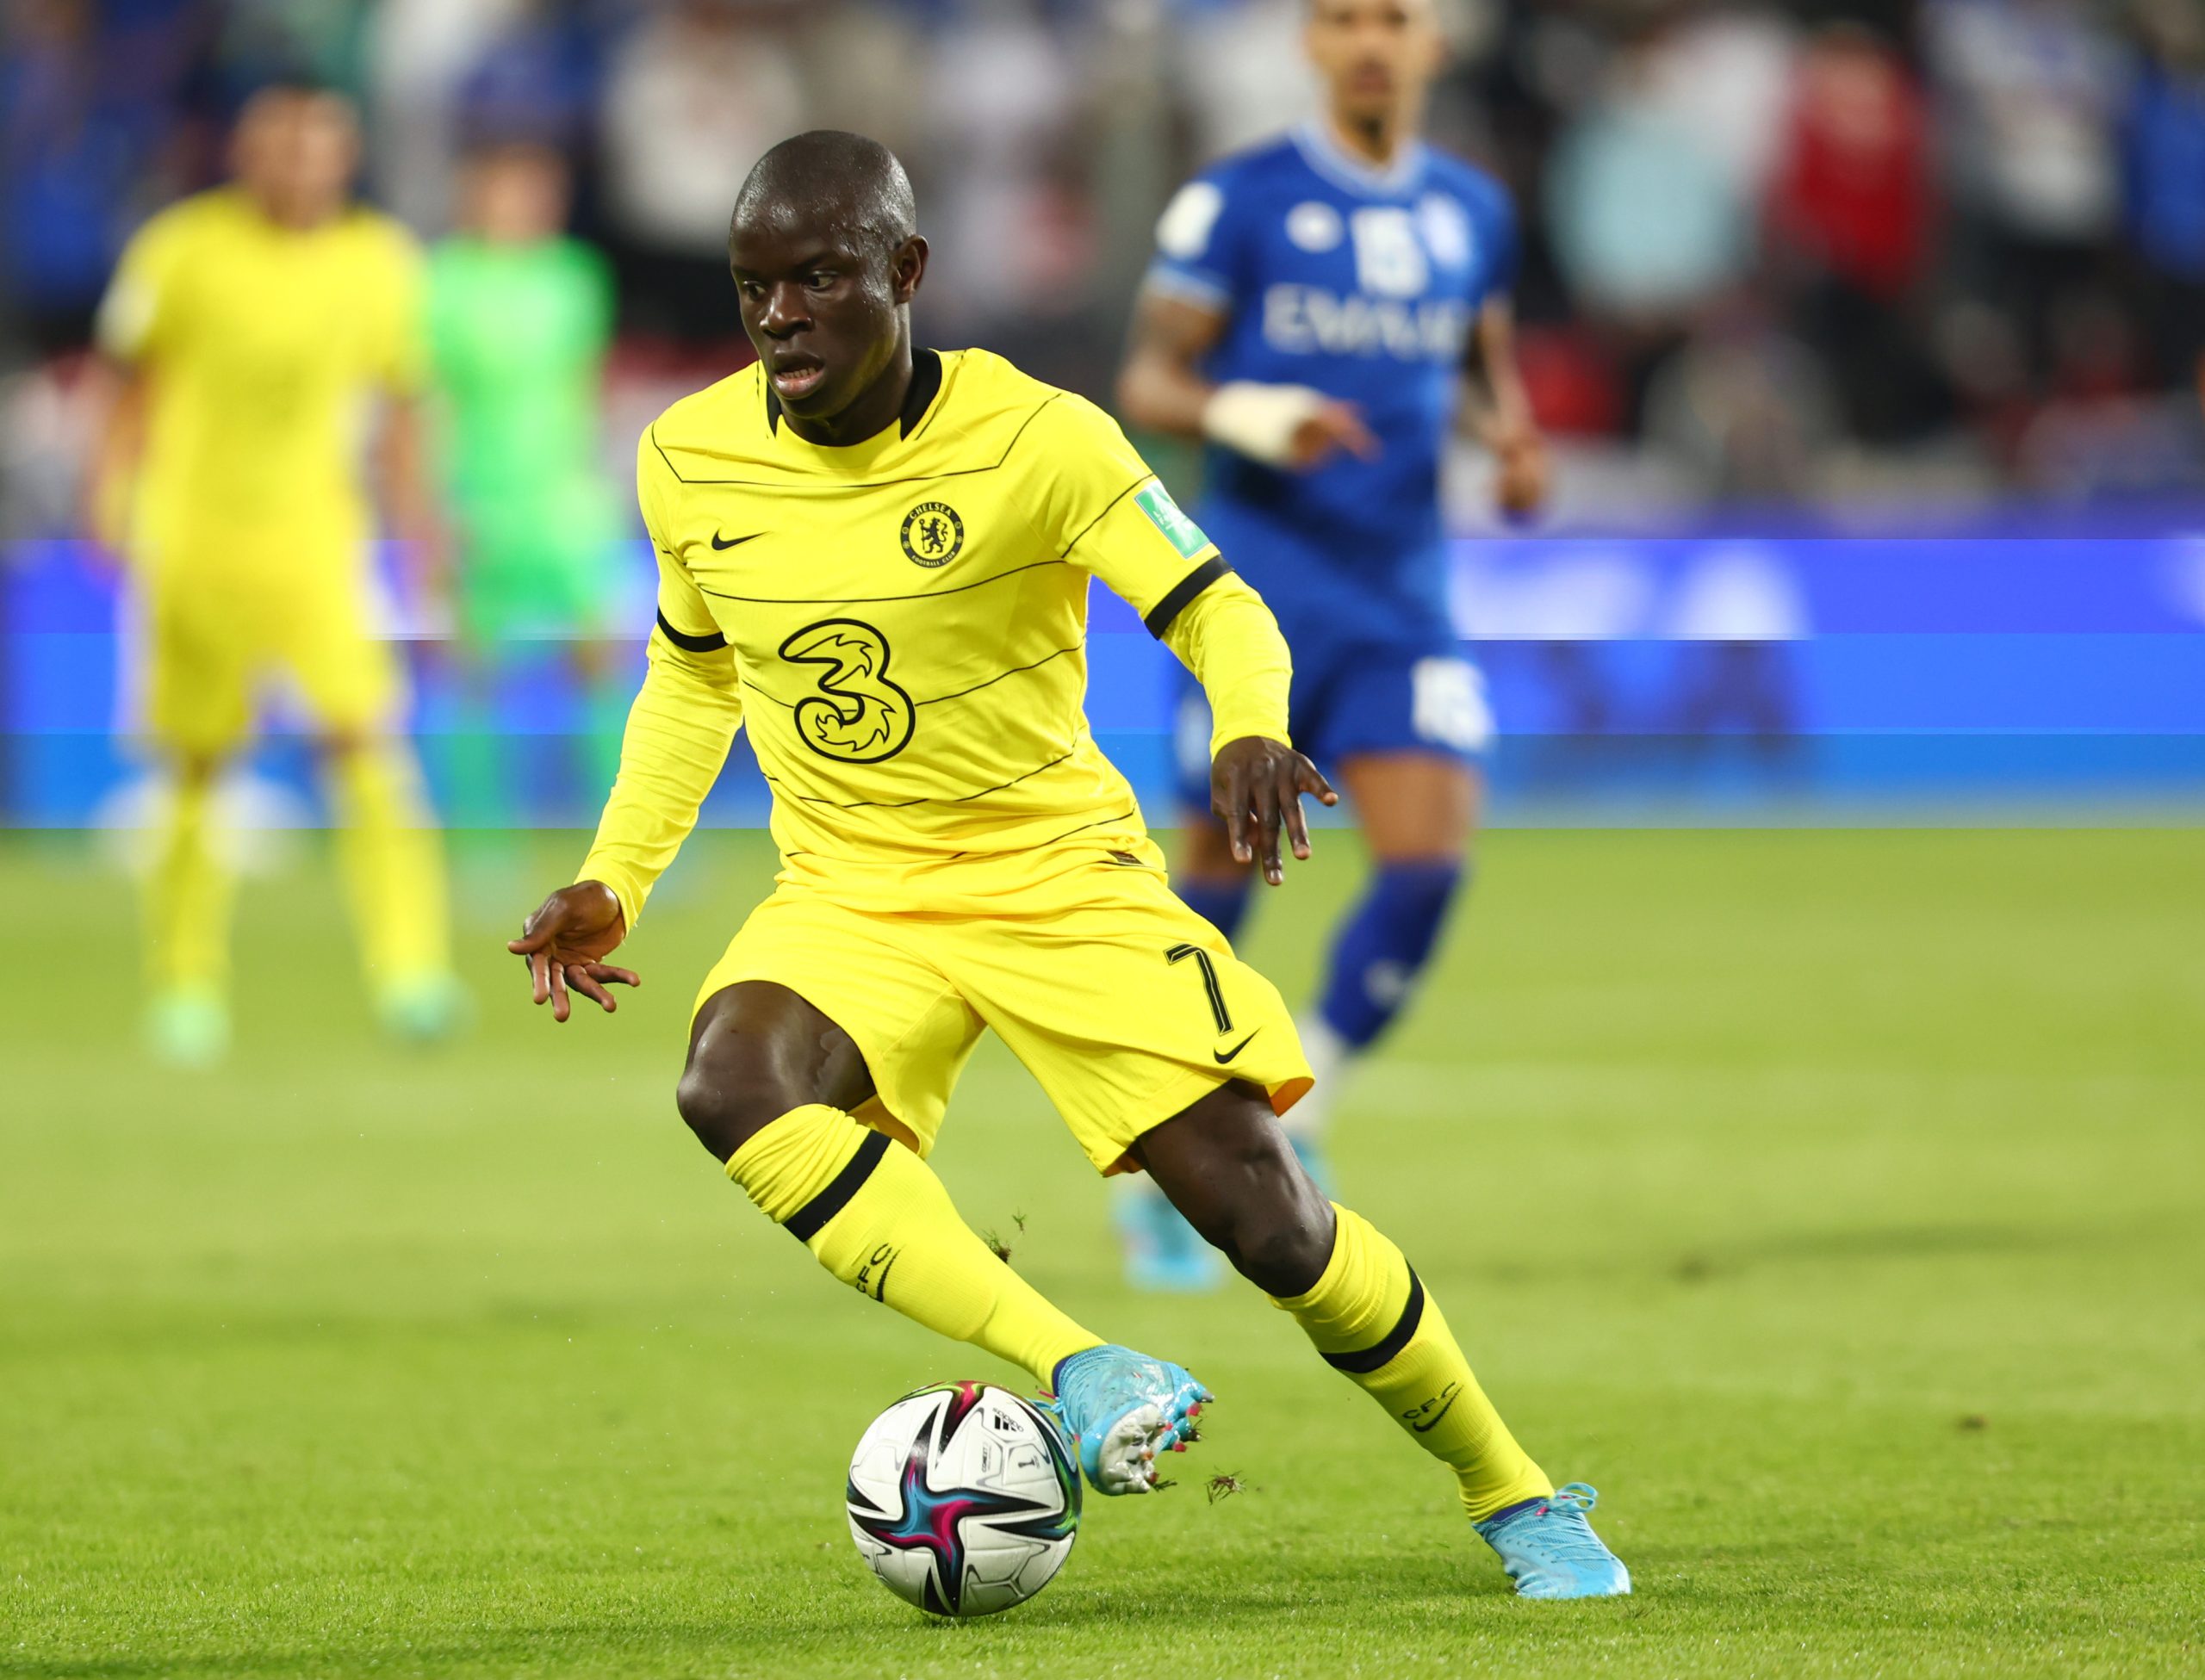 Fabrizio Romano claims Chelsea star N'Golo Kante could leave for free next summer.